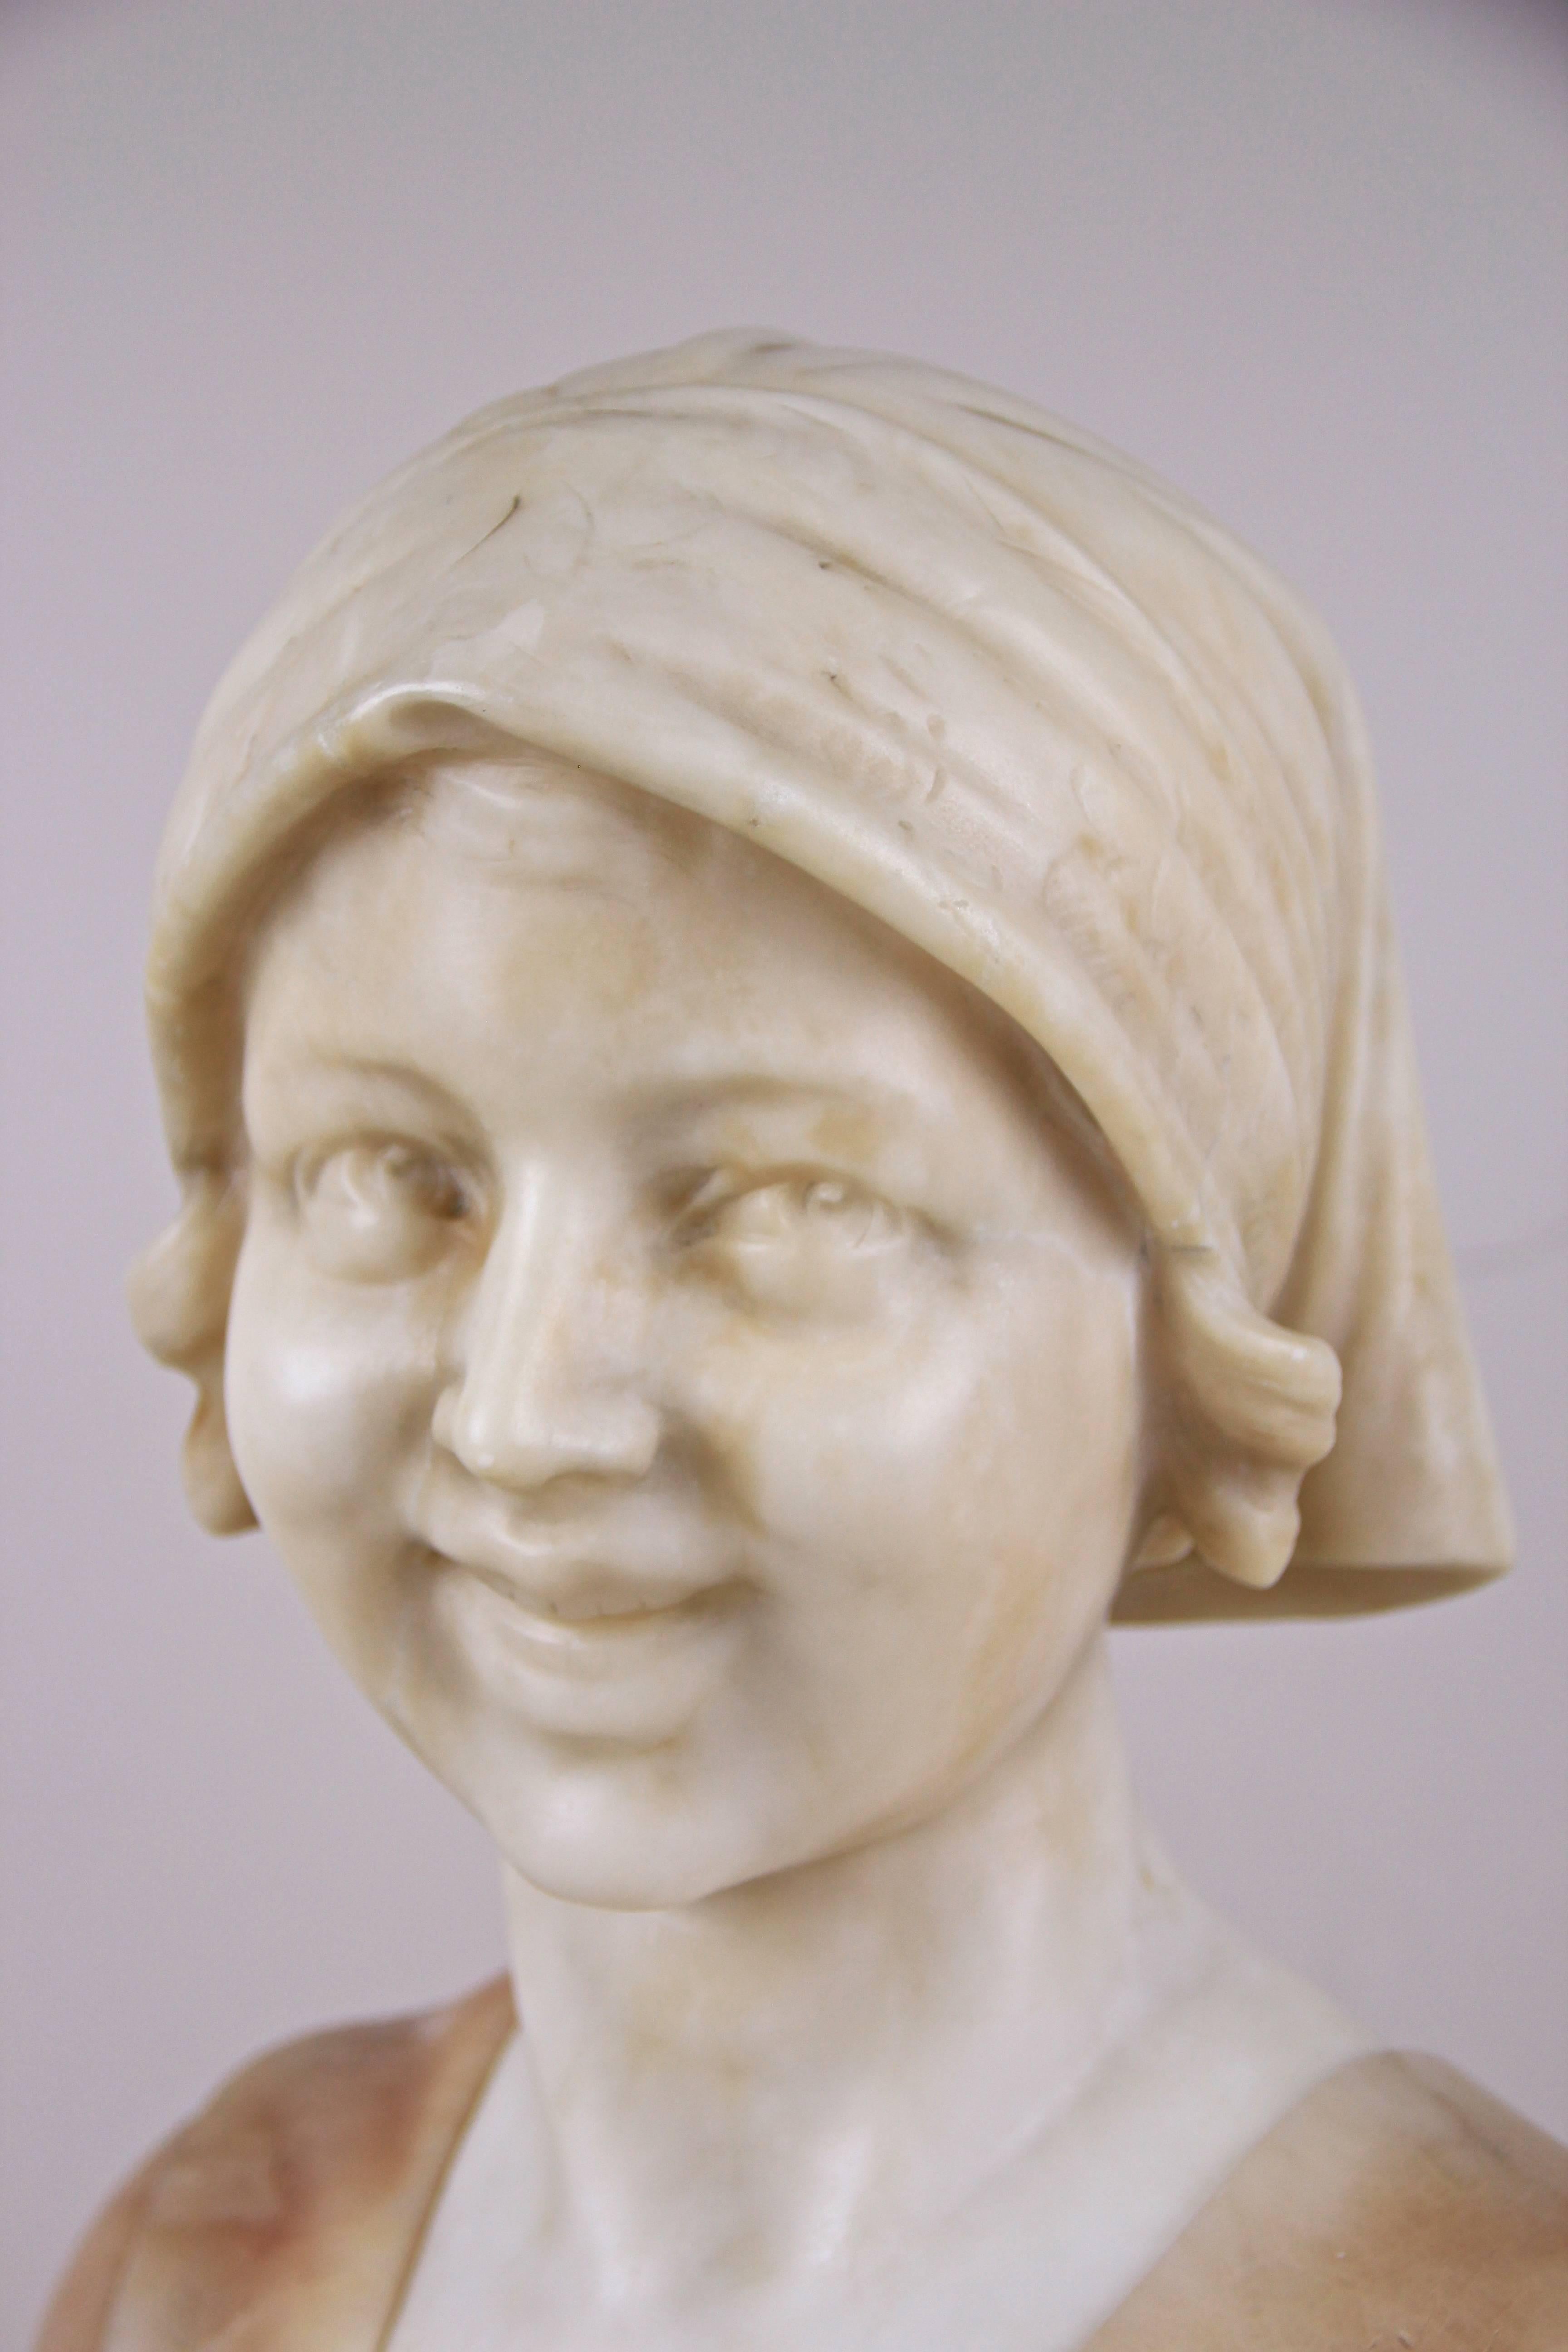 Lovely Art Nouveau Bust of a young woman made in Italy at the beginning of the 20th century. Worked out of fine alabaster the sculptor took greatest attention on details. Just watch the facial expression - made to look super realistic. Also the